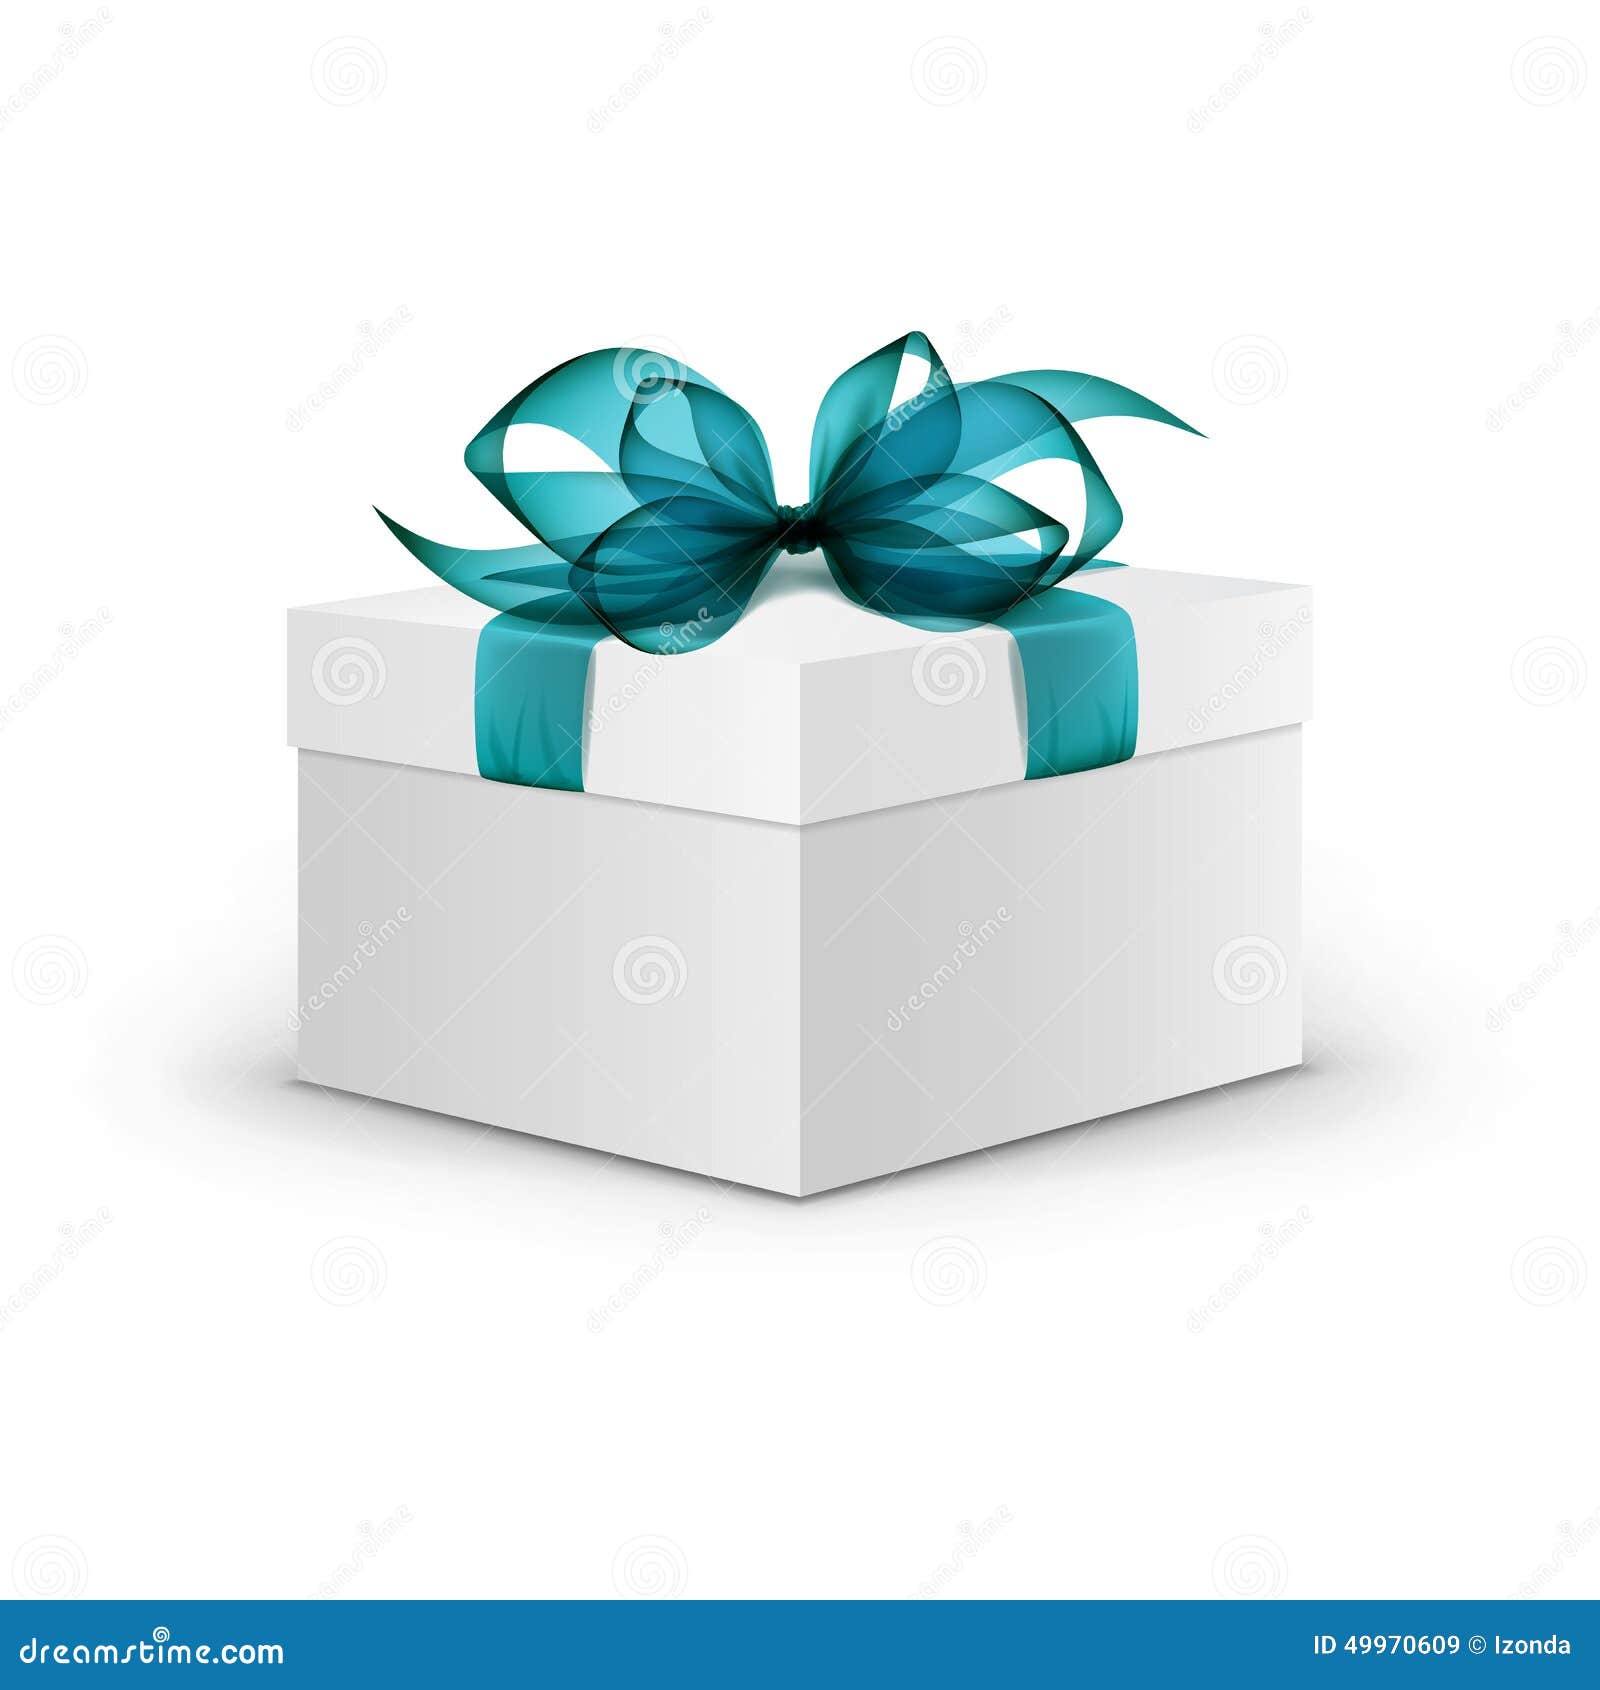 White Square Gift Box With Light Blue Ribbon Stock Vector - Image: 49970609